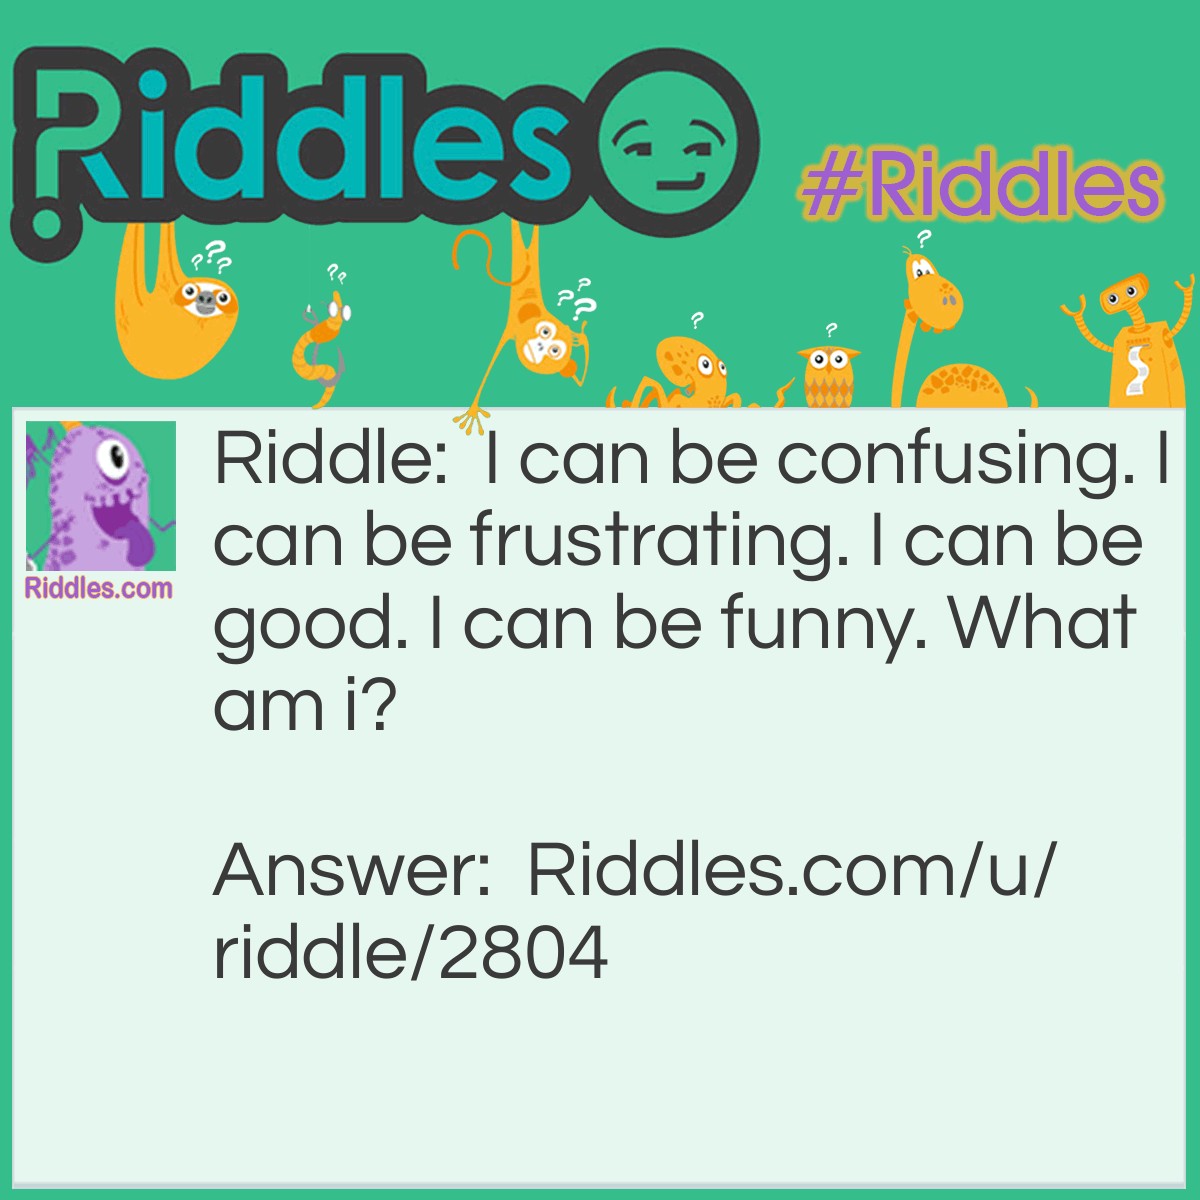 Riddle: I can be confusing. I can be frustrating. I can be good. I can be funny. What am i? Answer: A riddle.